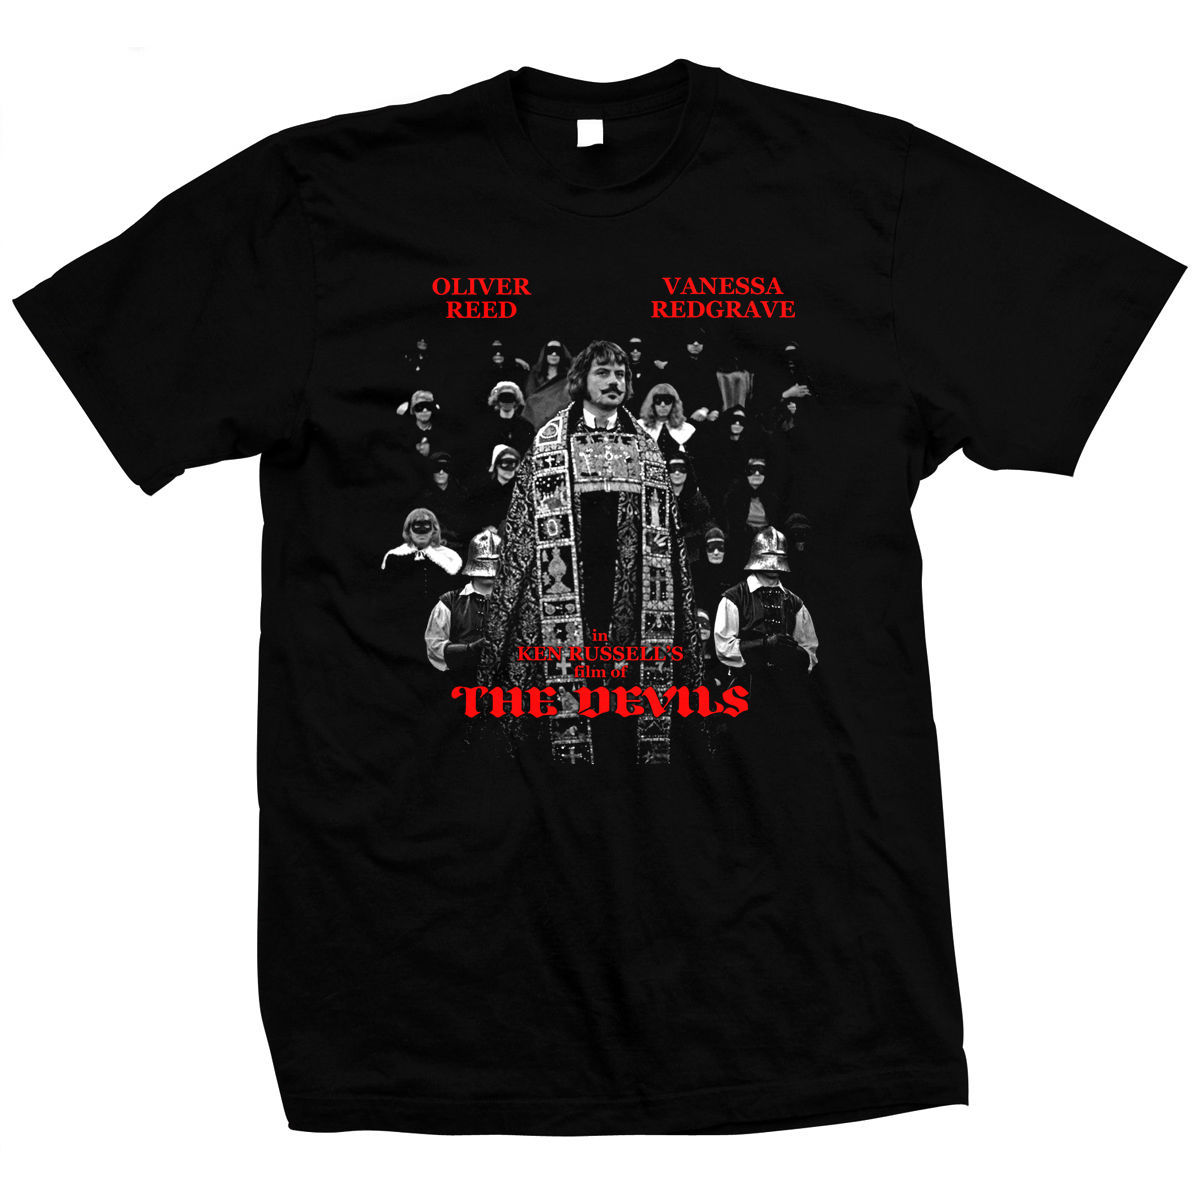 Ken Russell's The Devils - Oliver Reed - Hand screened, Pre-shrunk T-Shirt